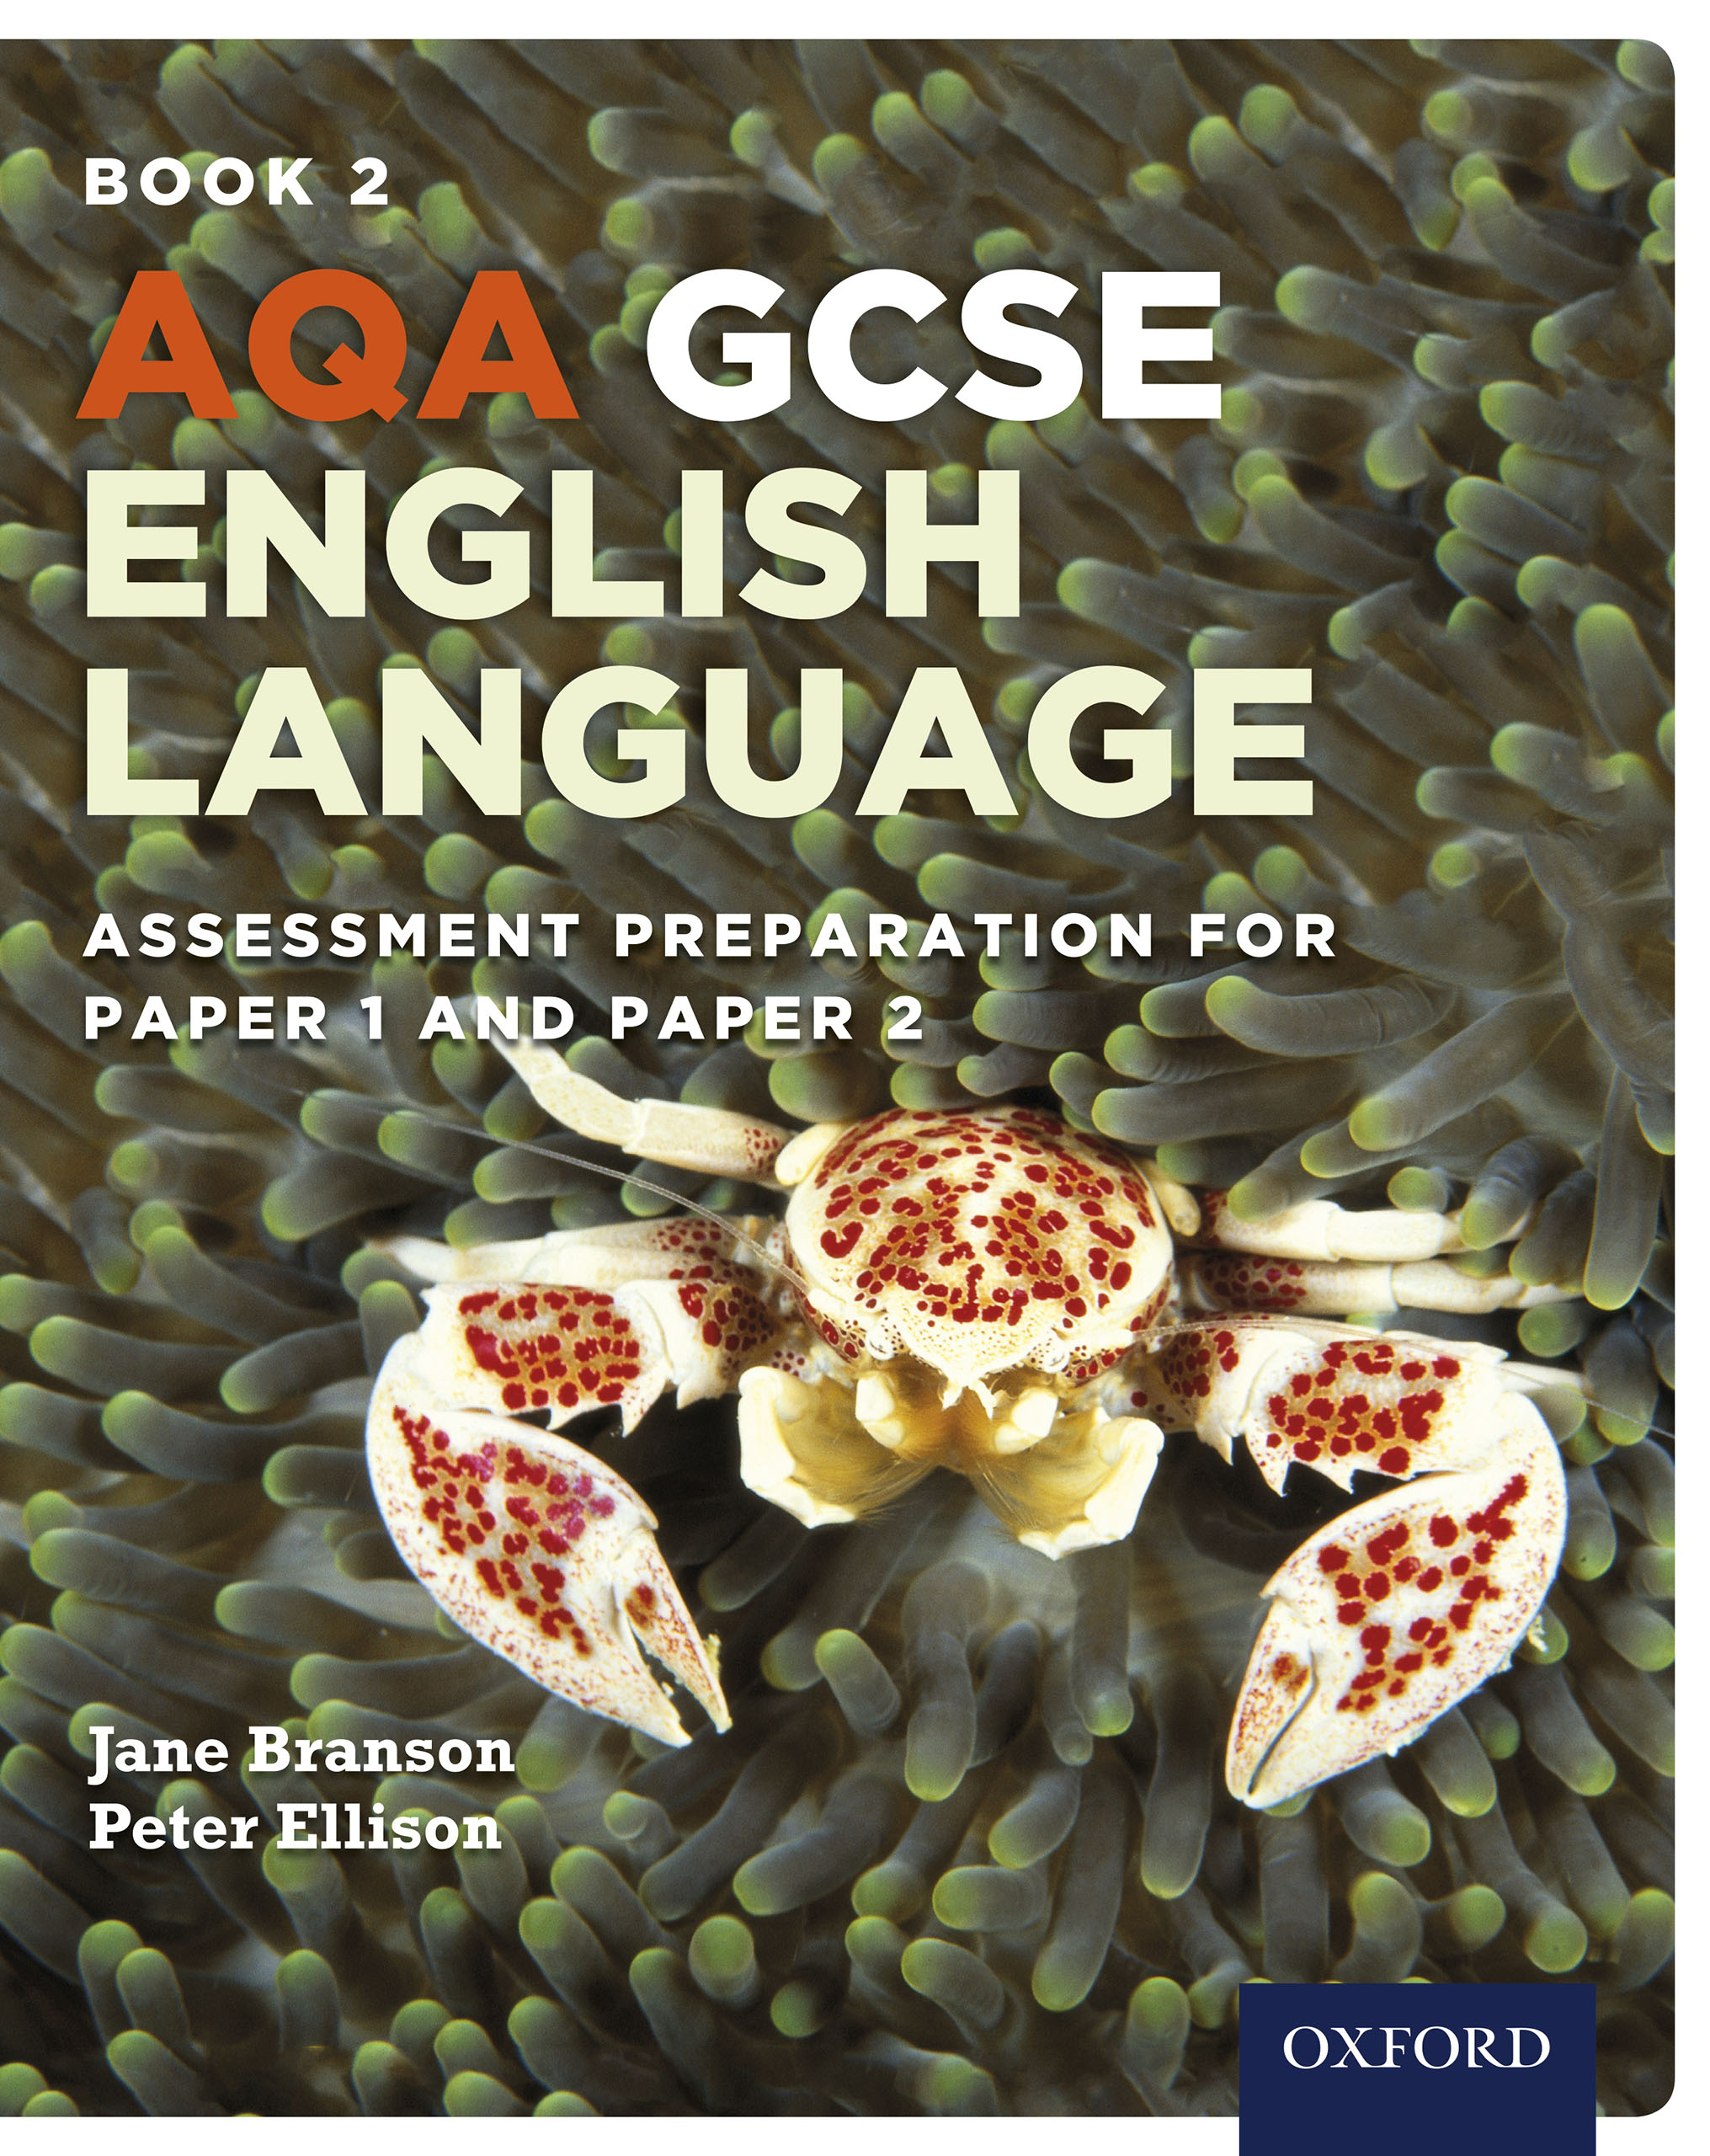 AQA GCSE English language - Asessment preparation for paper 1 and paer 2